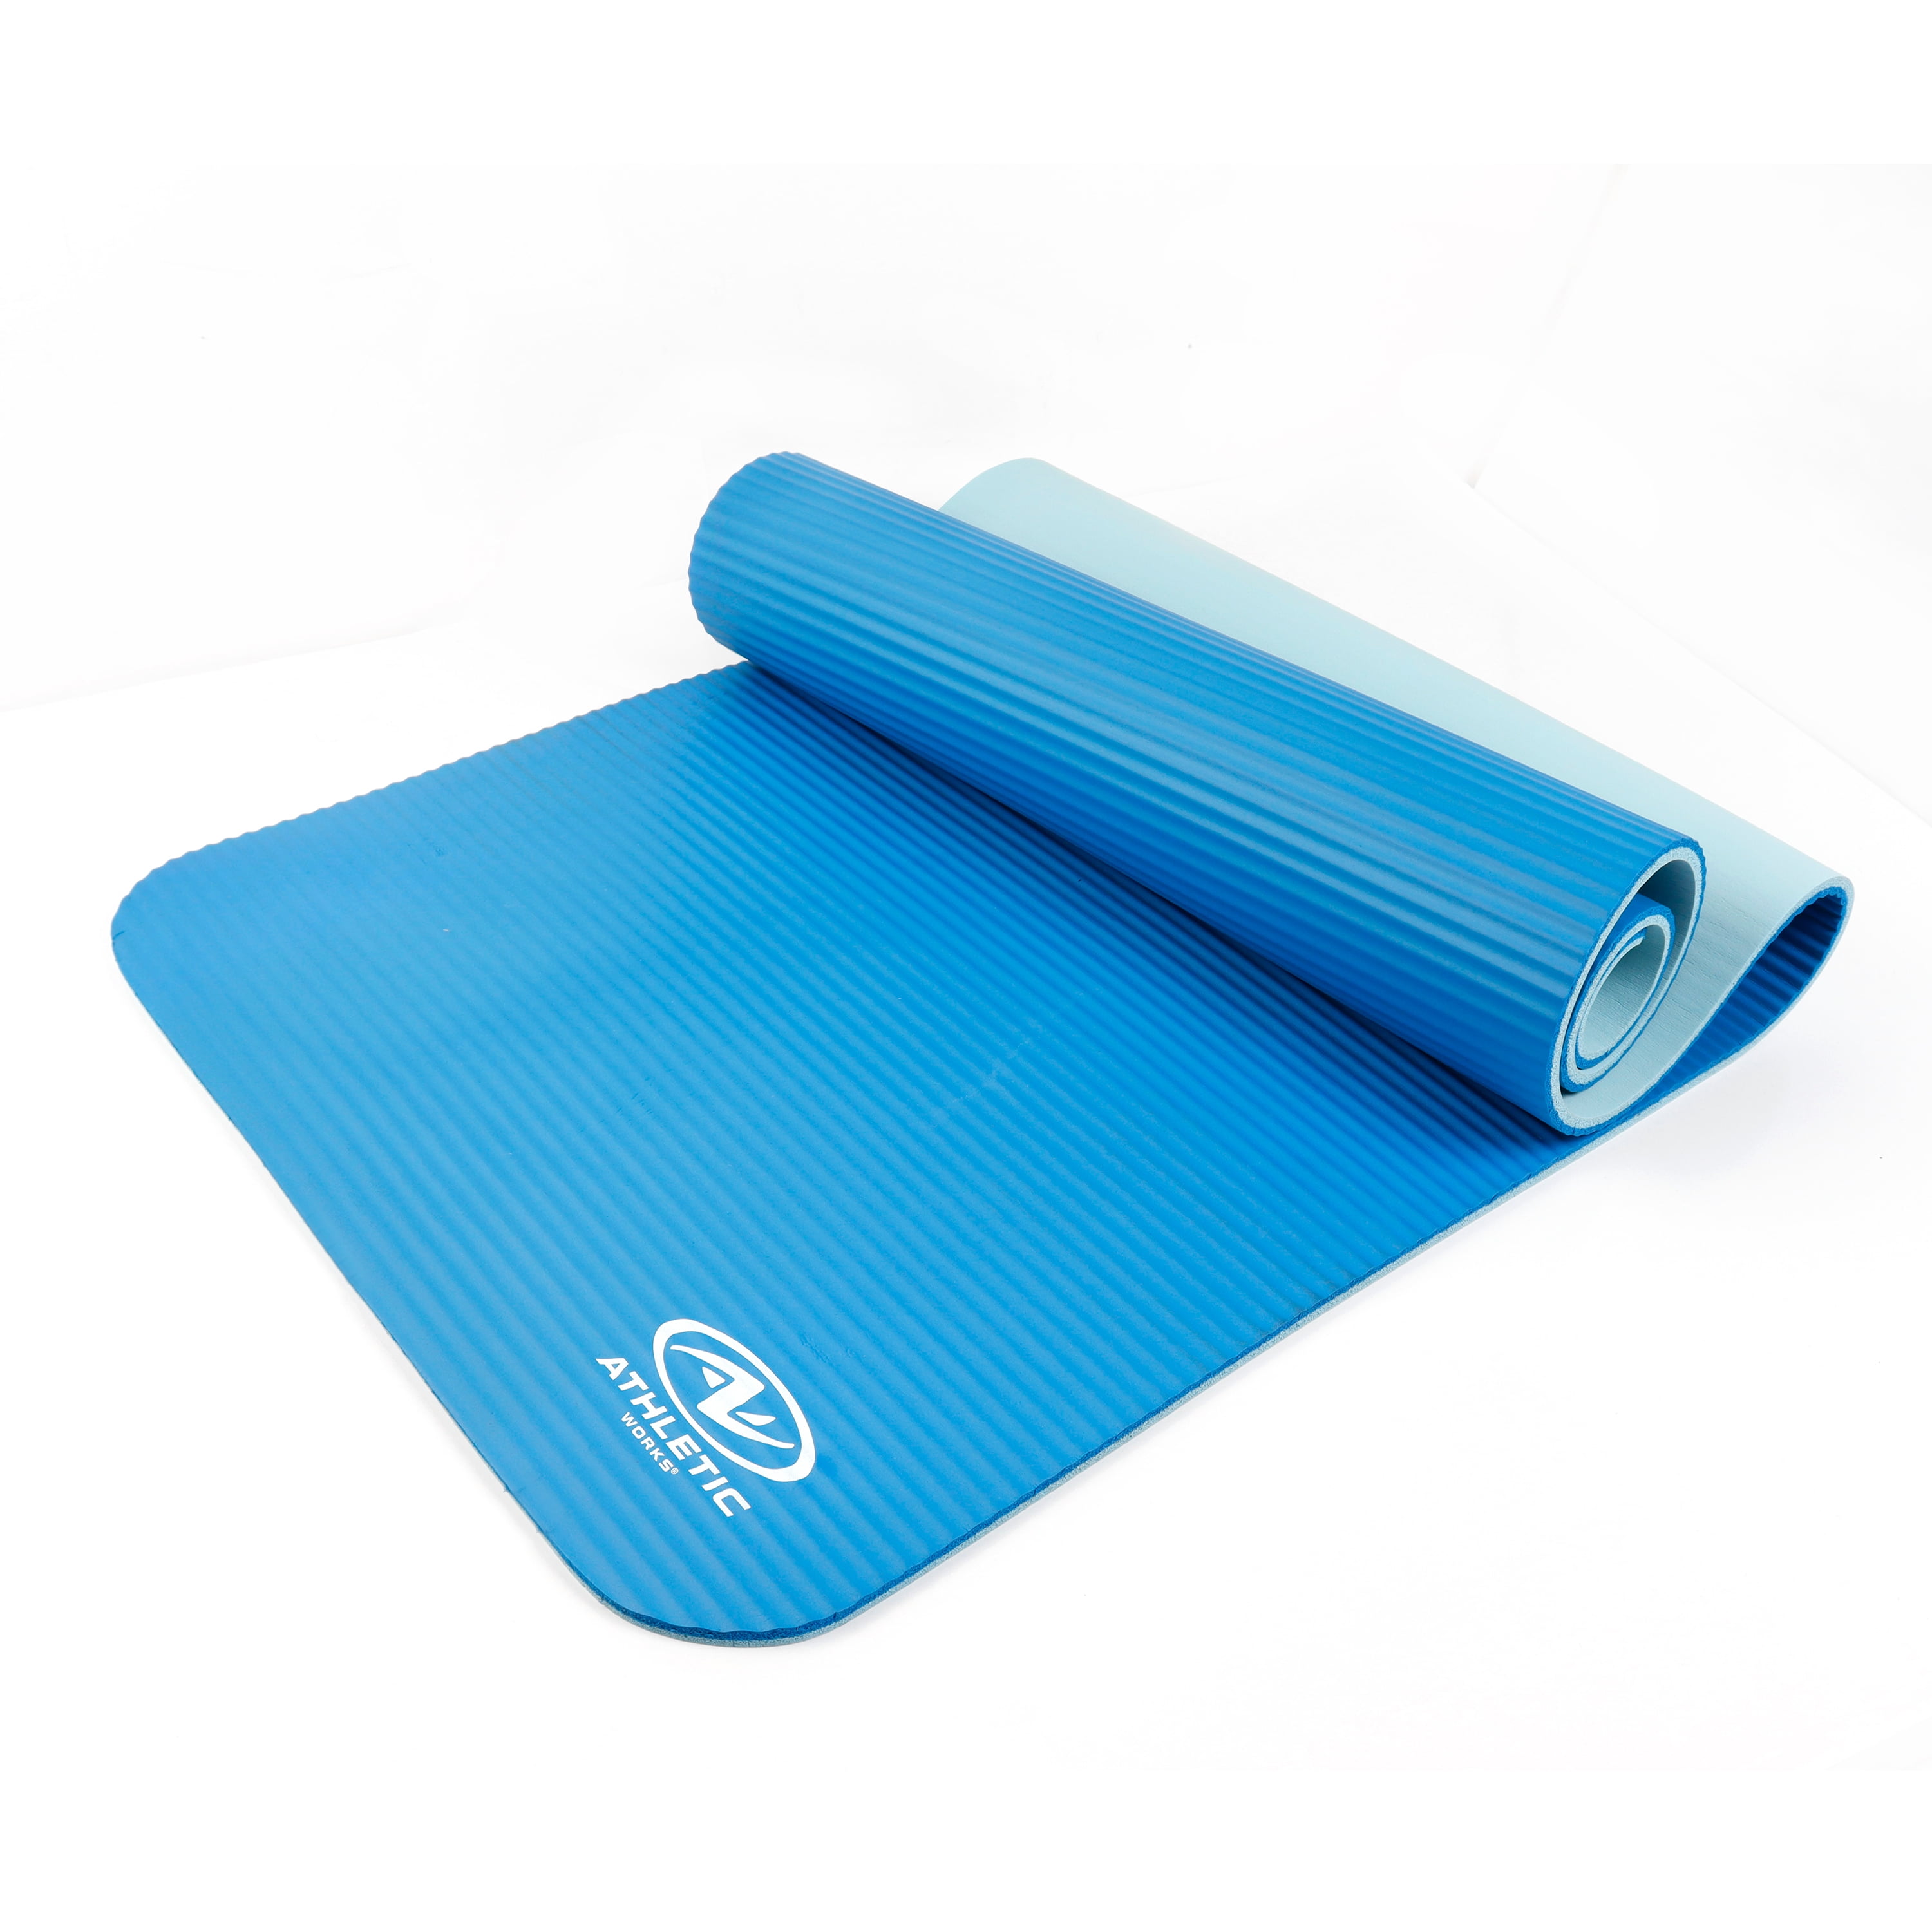 Portable Non Slip Thick Yoga Mat For Pilates Fitness Exercise Gym Pad Supplies 